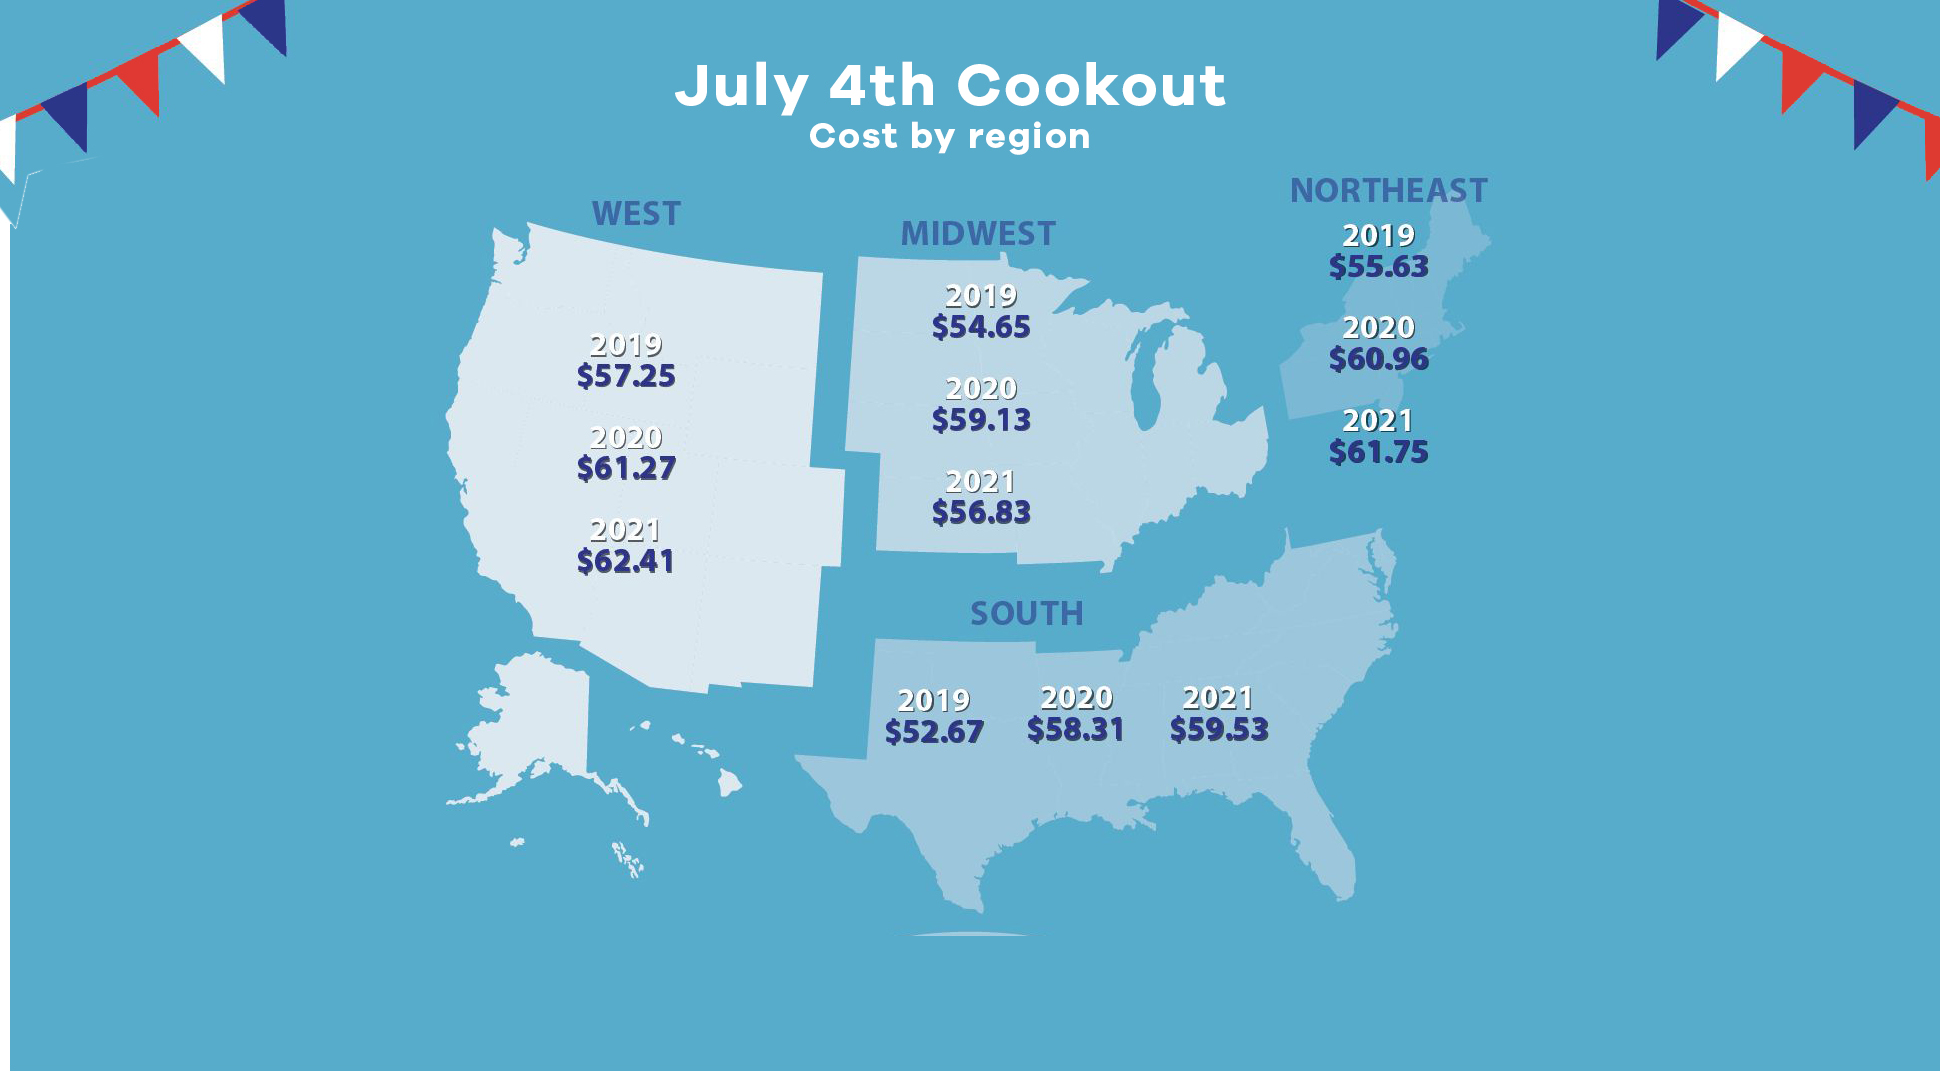 The price for your July 4th cookout